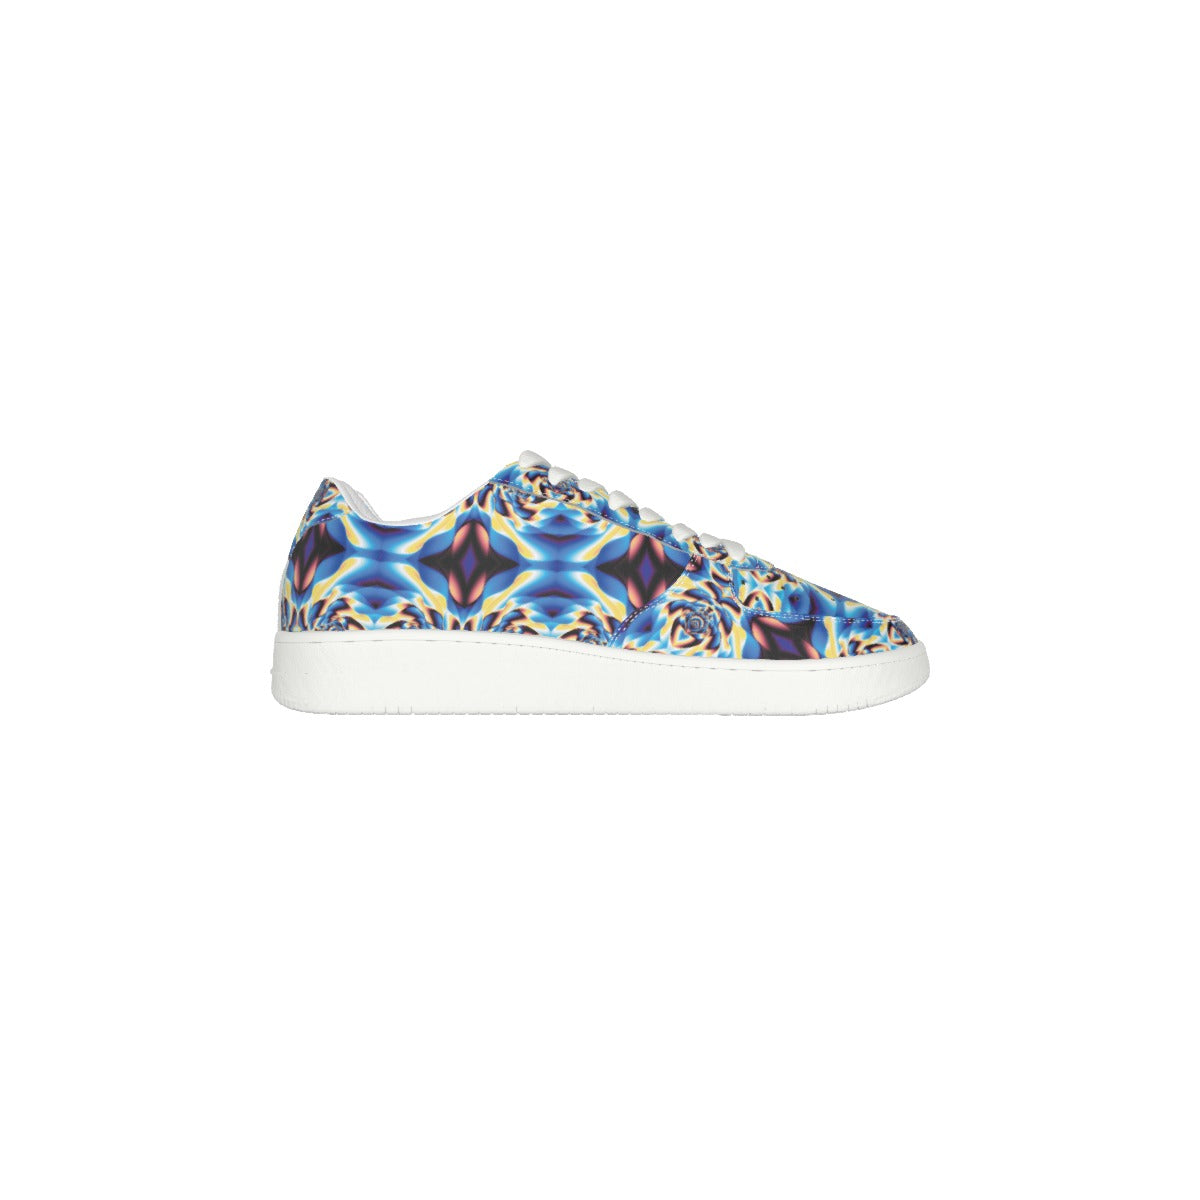 Psychedelic Print Unisex Shoes - kayzers